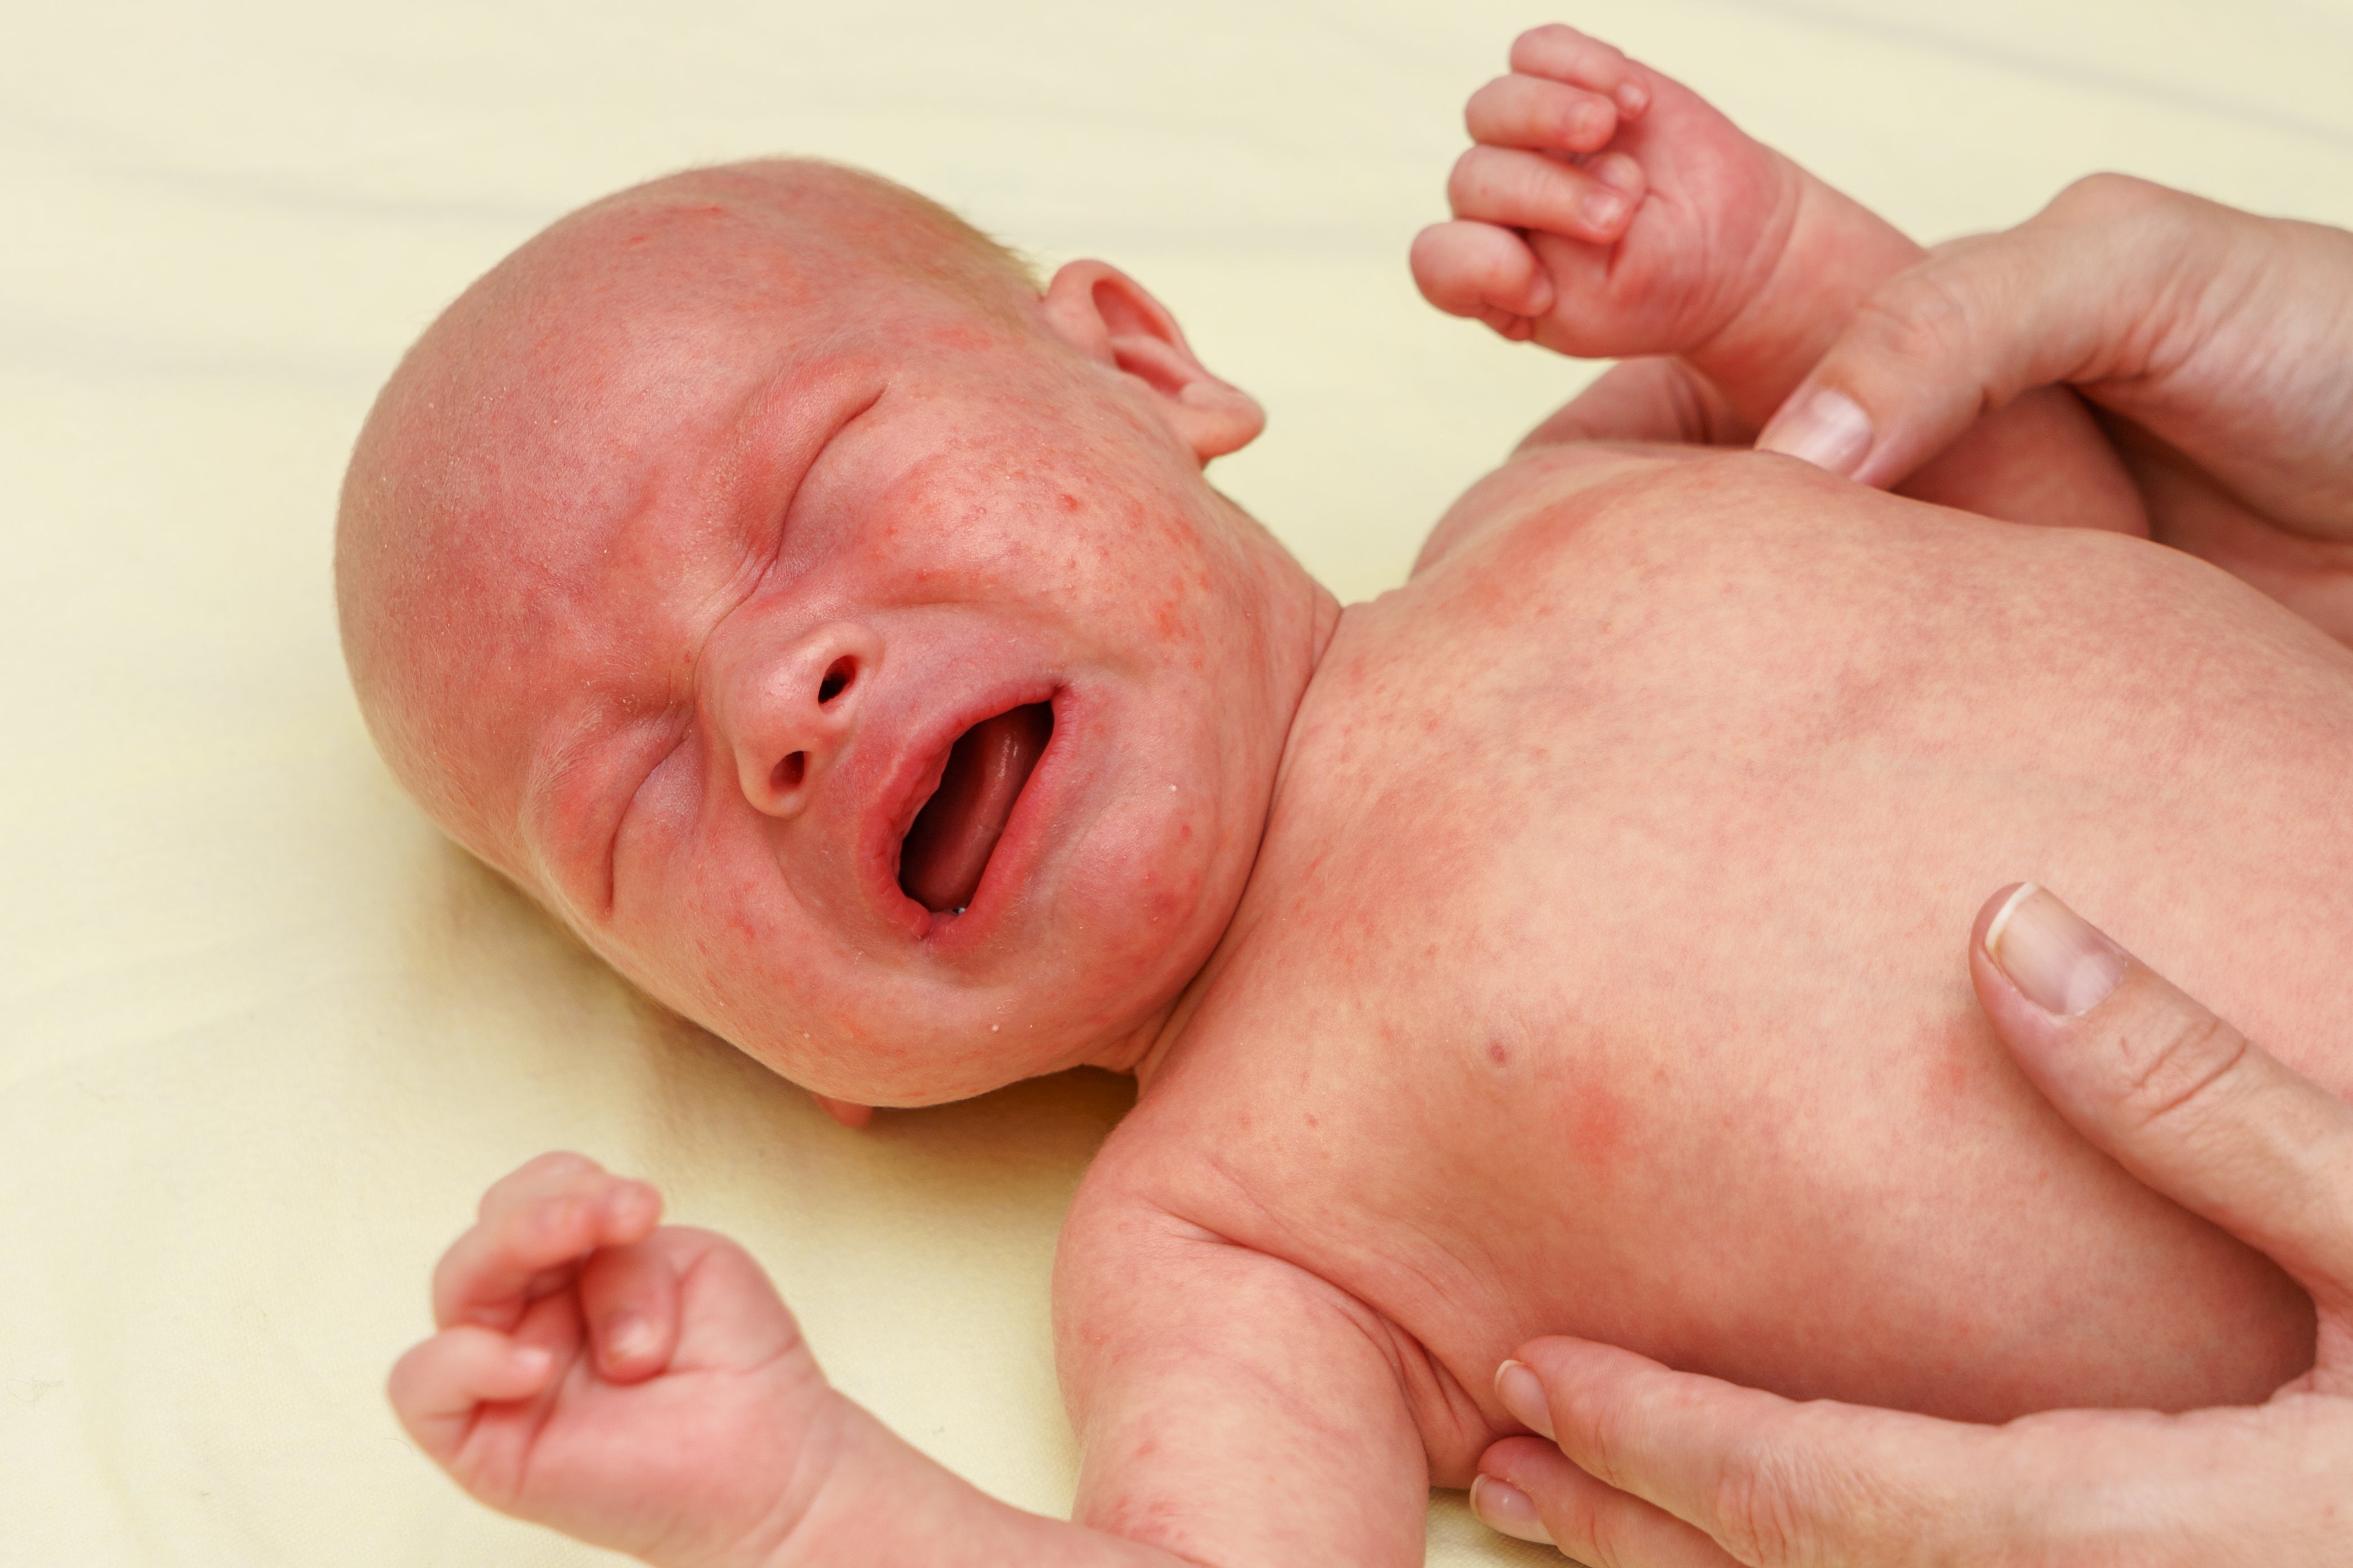 Measuring Eczema Severity on a Baby